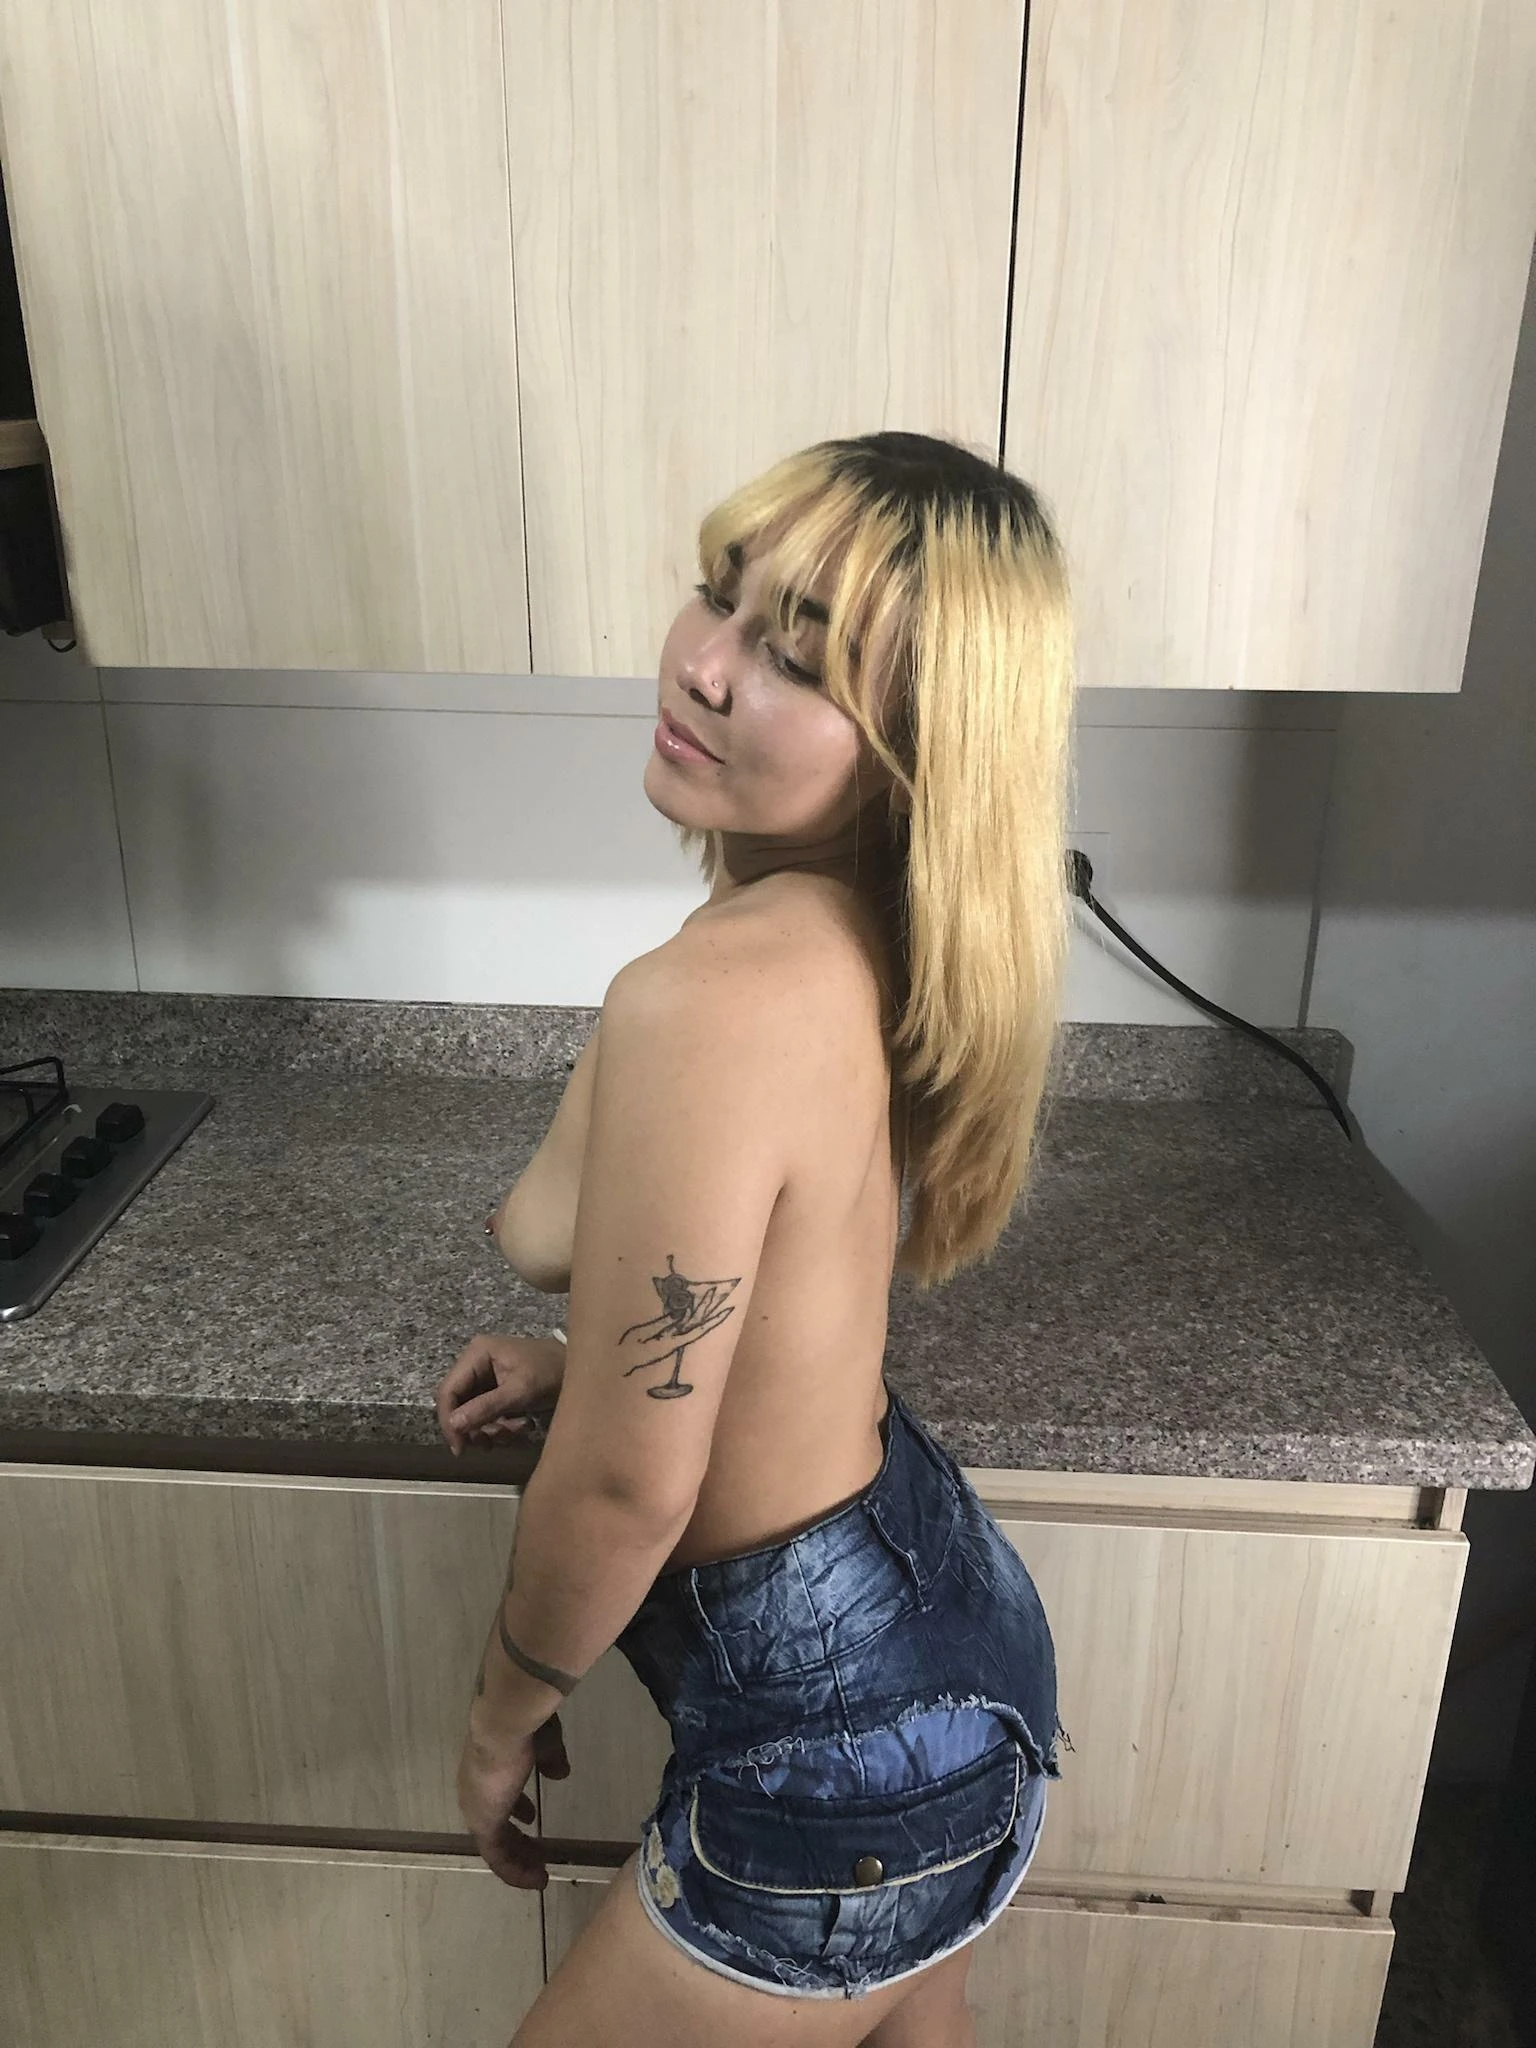 Would you fuck my latina pussy on the counter?